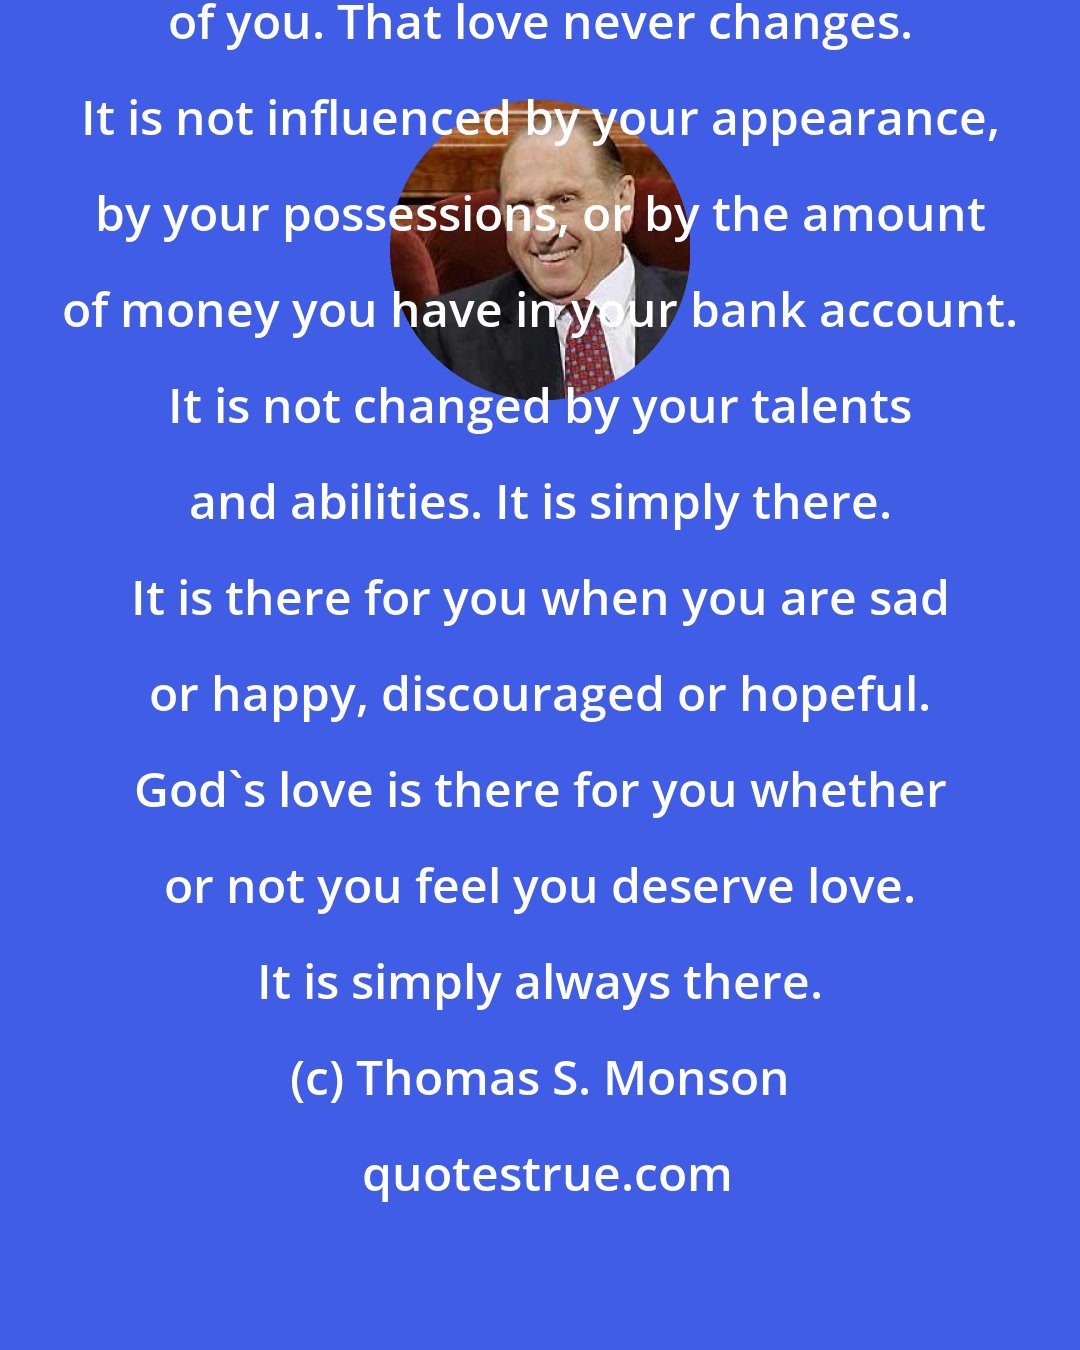 Thomas S. Monson: Your Heavenly Father loves you-each of you. That love never changes. It is not influenced by your appearance, by your possessions, or by the amount of money you have in your bank account. It is not changed by your talents and abilities. It is simply there. It is there for you when you are sad or happy, discouraged or hopeful. God's love is there for you whether or not you feel you deserve love. It is simply always there.